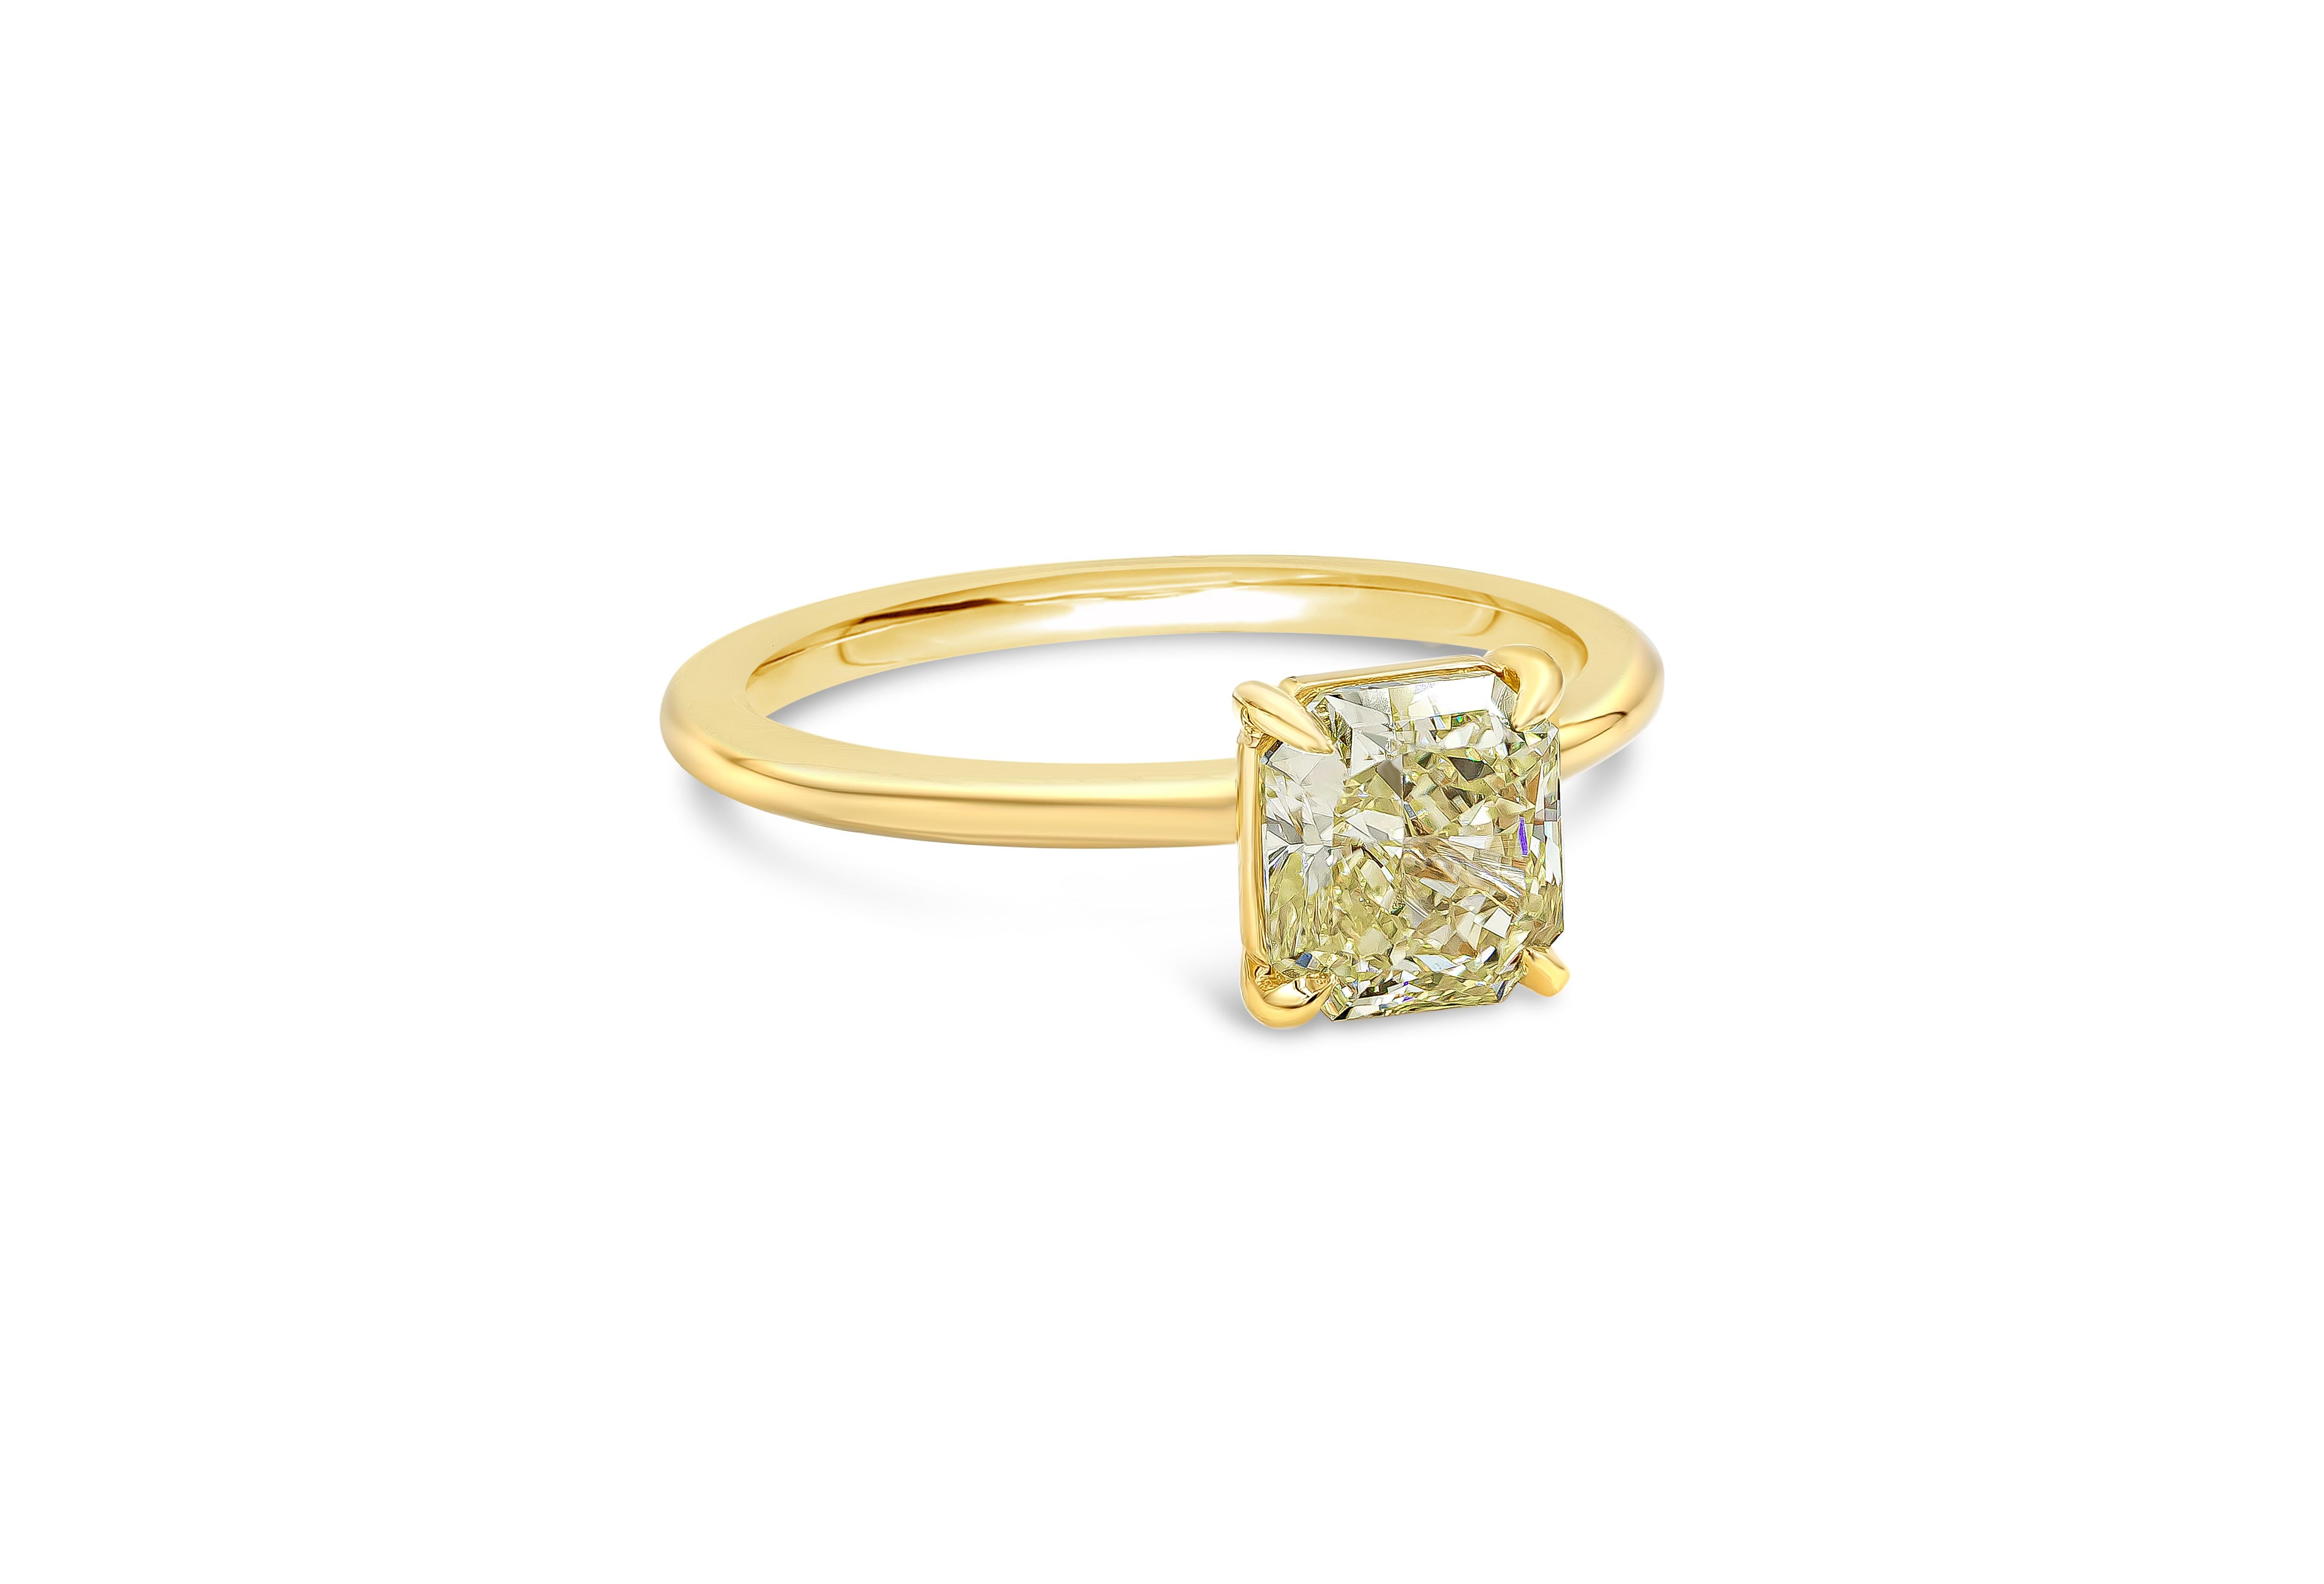 A timeless solitaire engagement ring style features a color-rich 1.35 carat radiant cut yellow diamond certified by GIA as Fancy Intense Yellow color, VS2 clarity. Set in a thin polished 18K yellow gold mounting.

Roman Malakov is a custom house,